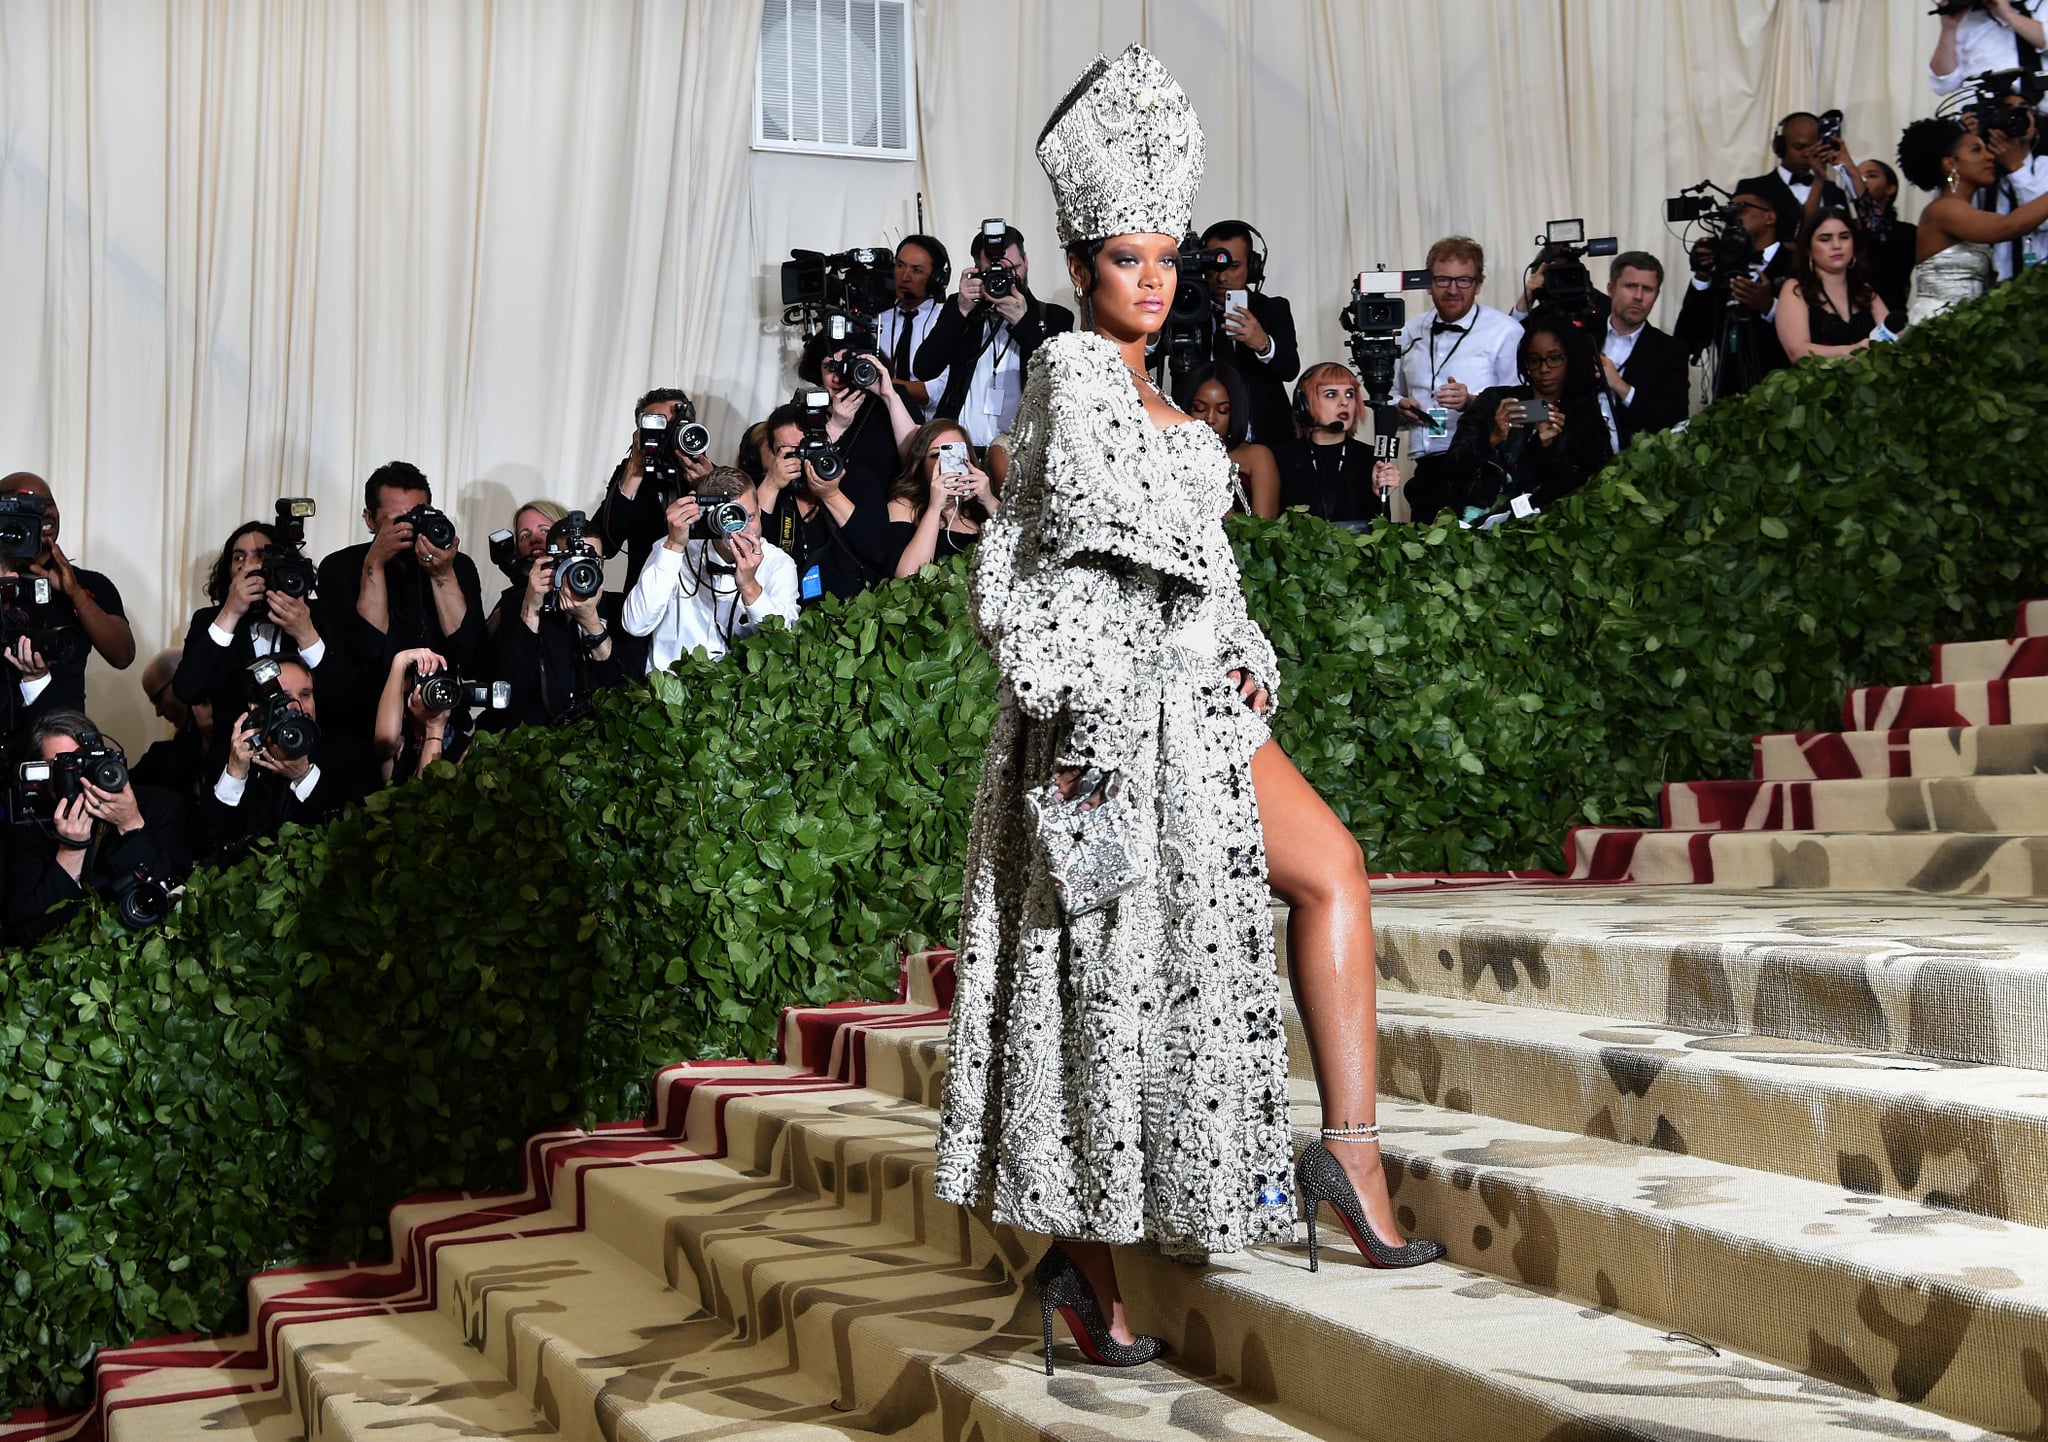 Rihanna arrives for the 2018 Met Gala on May 7, 2018, at the Metropolitan Museum of Art in New York. - The Gala raises money for the Metropolitan Museum of Arts Costume Institute. The Gala's 2018 theme is Heavenly Bodies: Fashion and the Catholic Imagination. (Photo by Hector RETAMAL / AFP)        (Photo credit should read HECTOR RETAMAL/AFP/Getty Images)